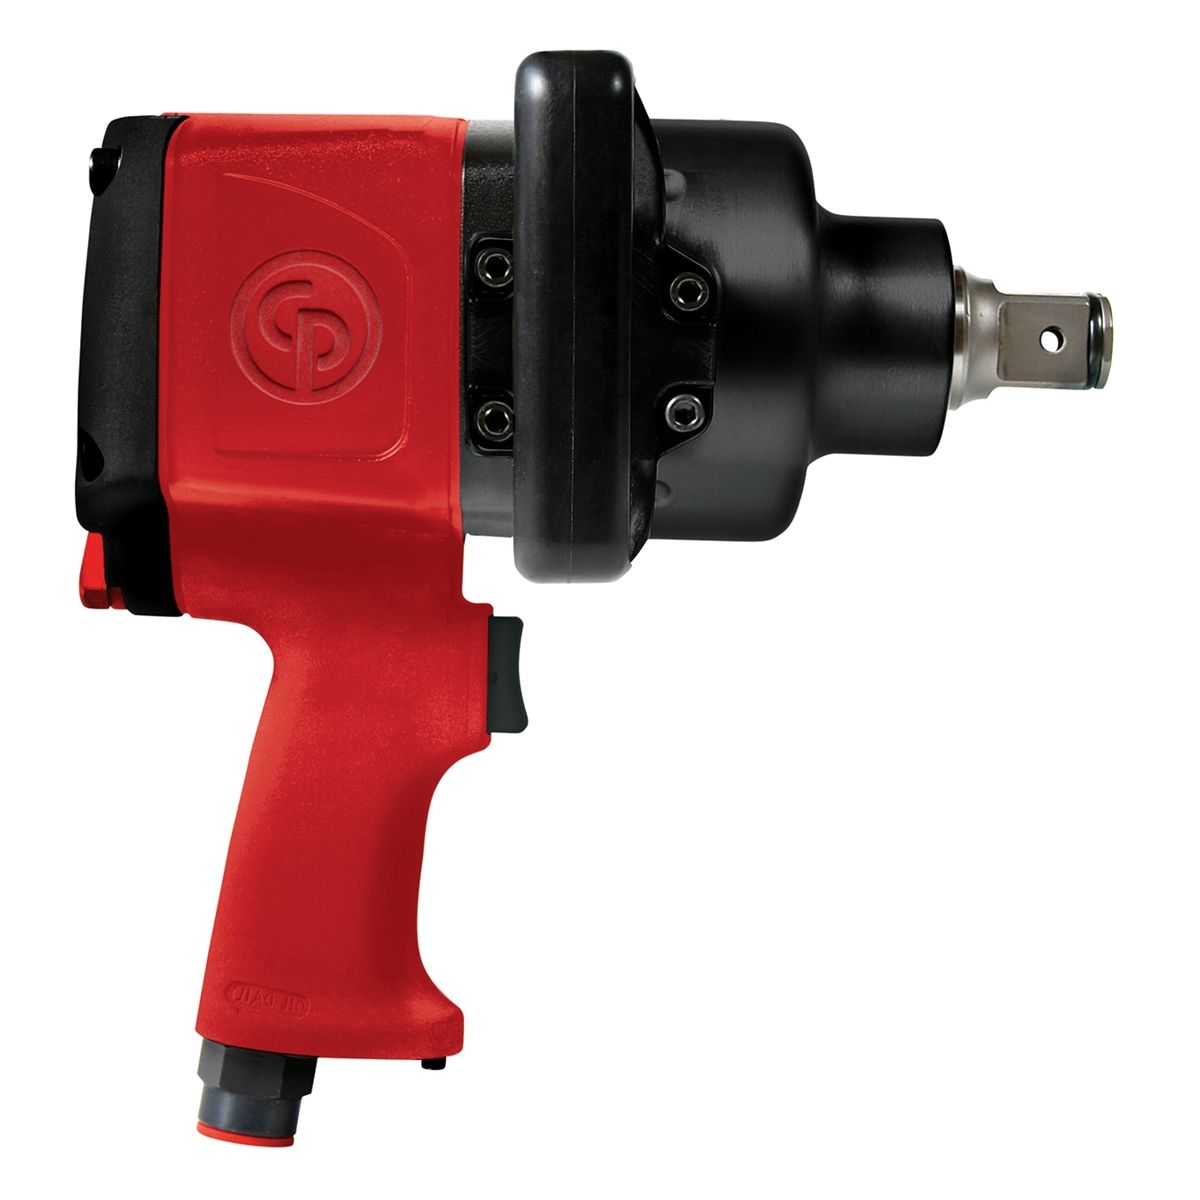 1" Inch Drive Pistol Grip Air Impact Wrench CPT7774